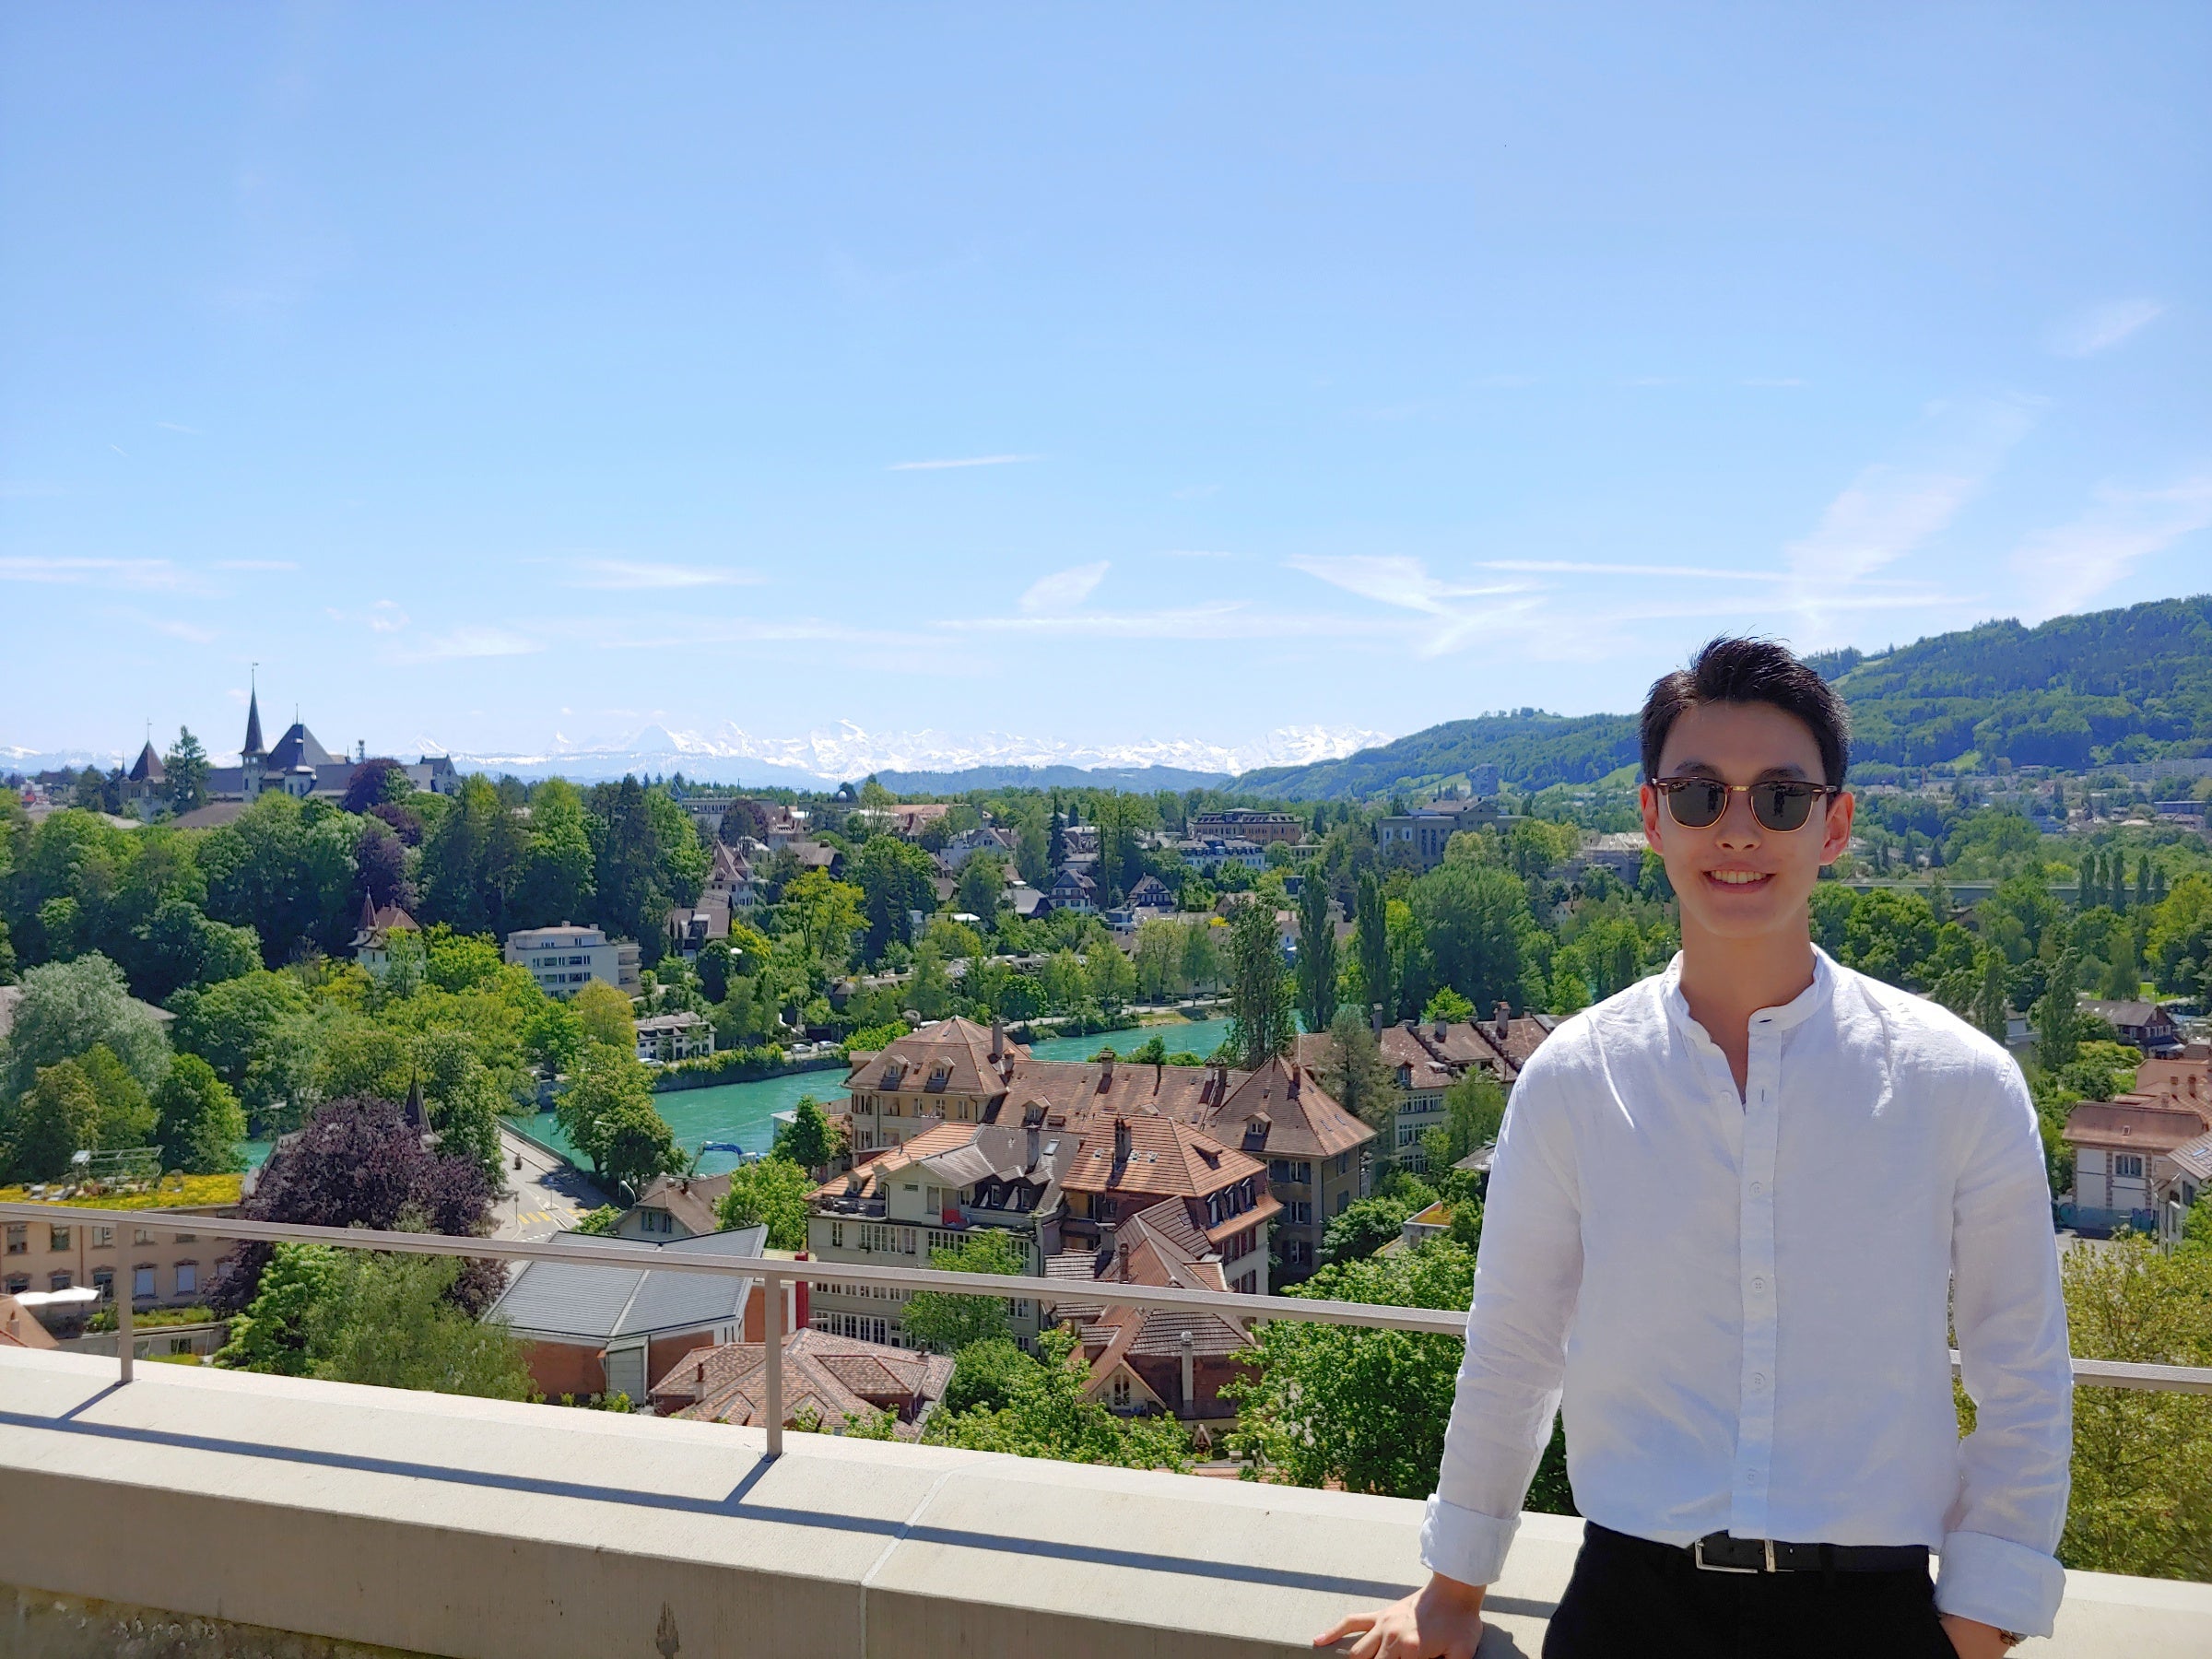 John standing on a balcony overlooking the city of Bern